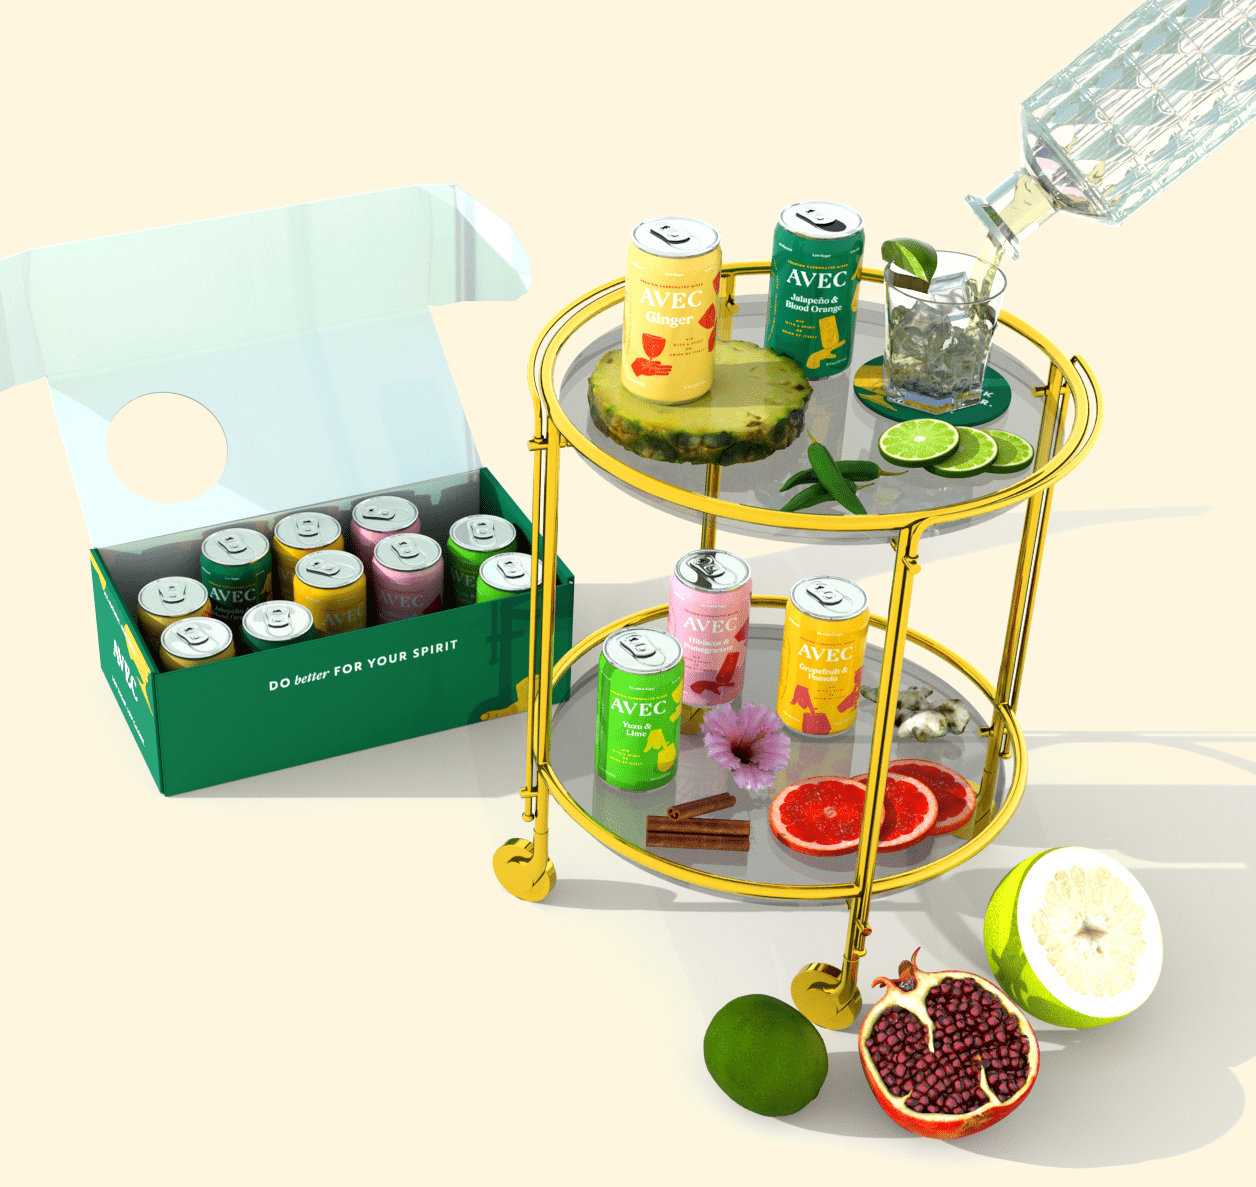 the sampler in a box and some colorful avec cans on a bar cart with fruit and a cocktail